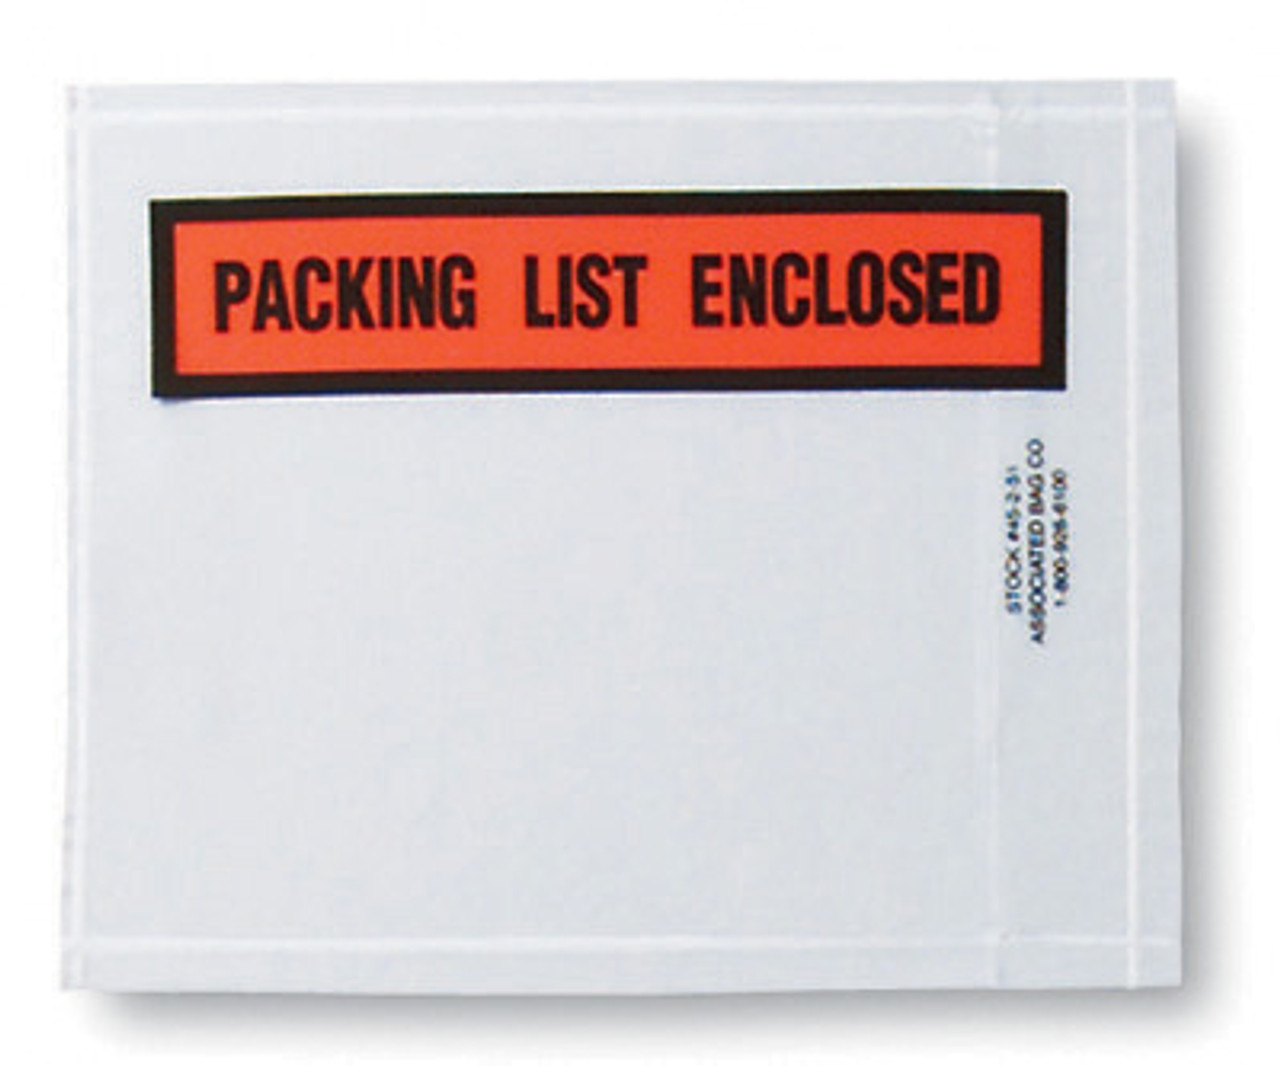 Back-Loading Printed Packing List Envelope - "Packing List Enclosed" (sold by the carton)